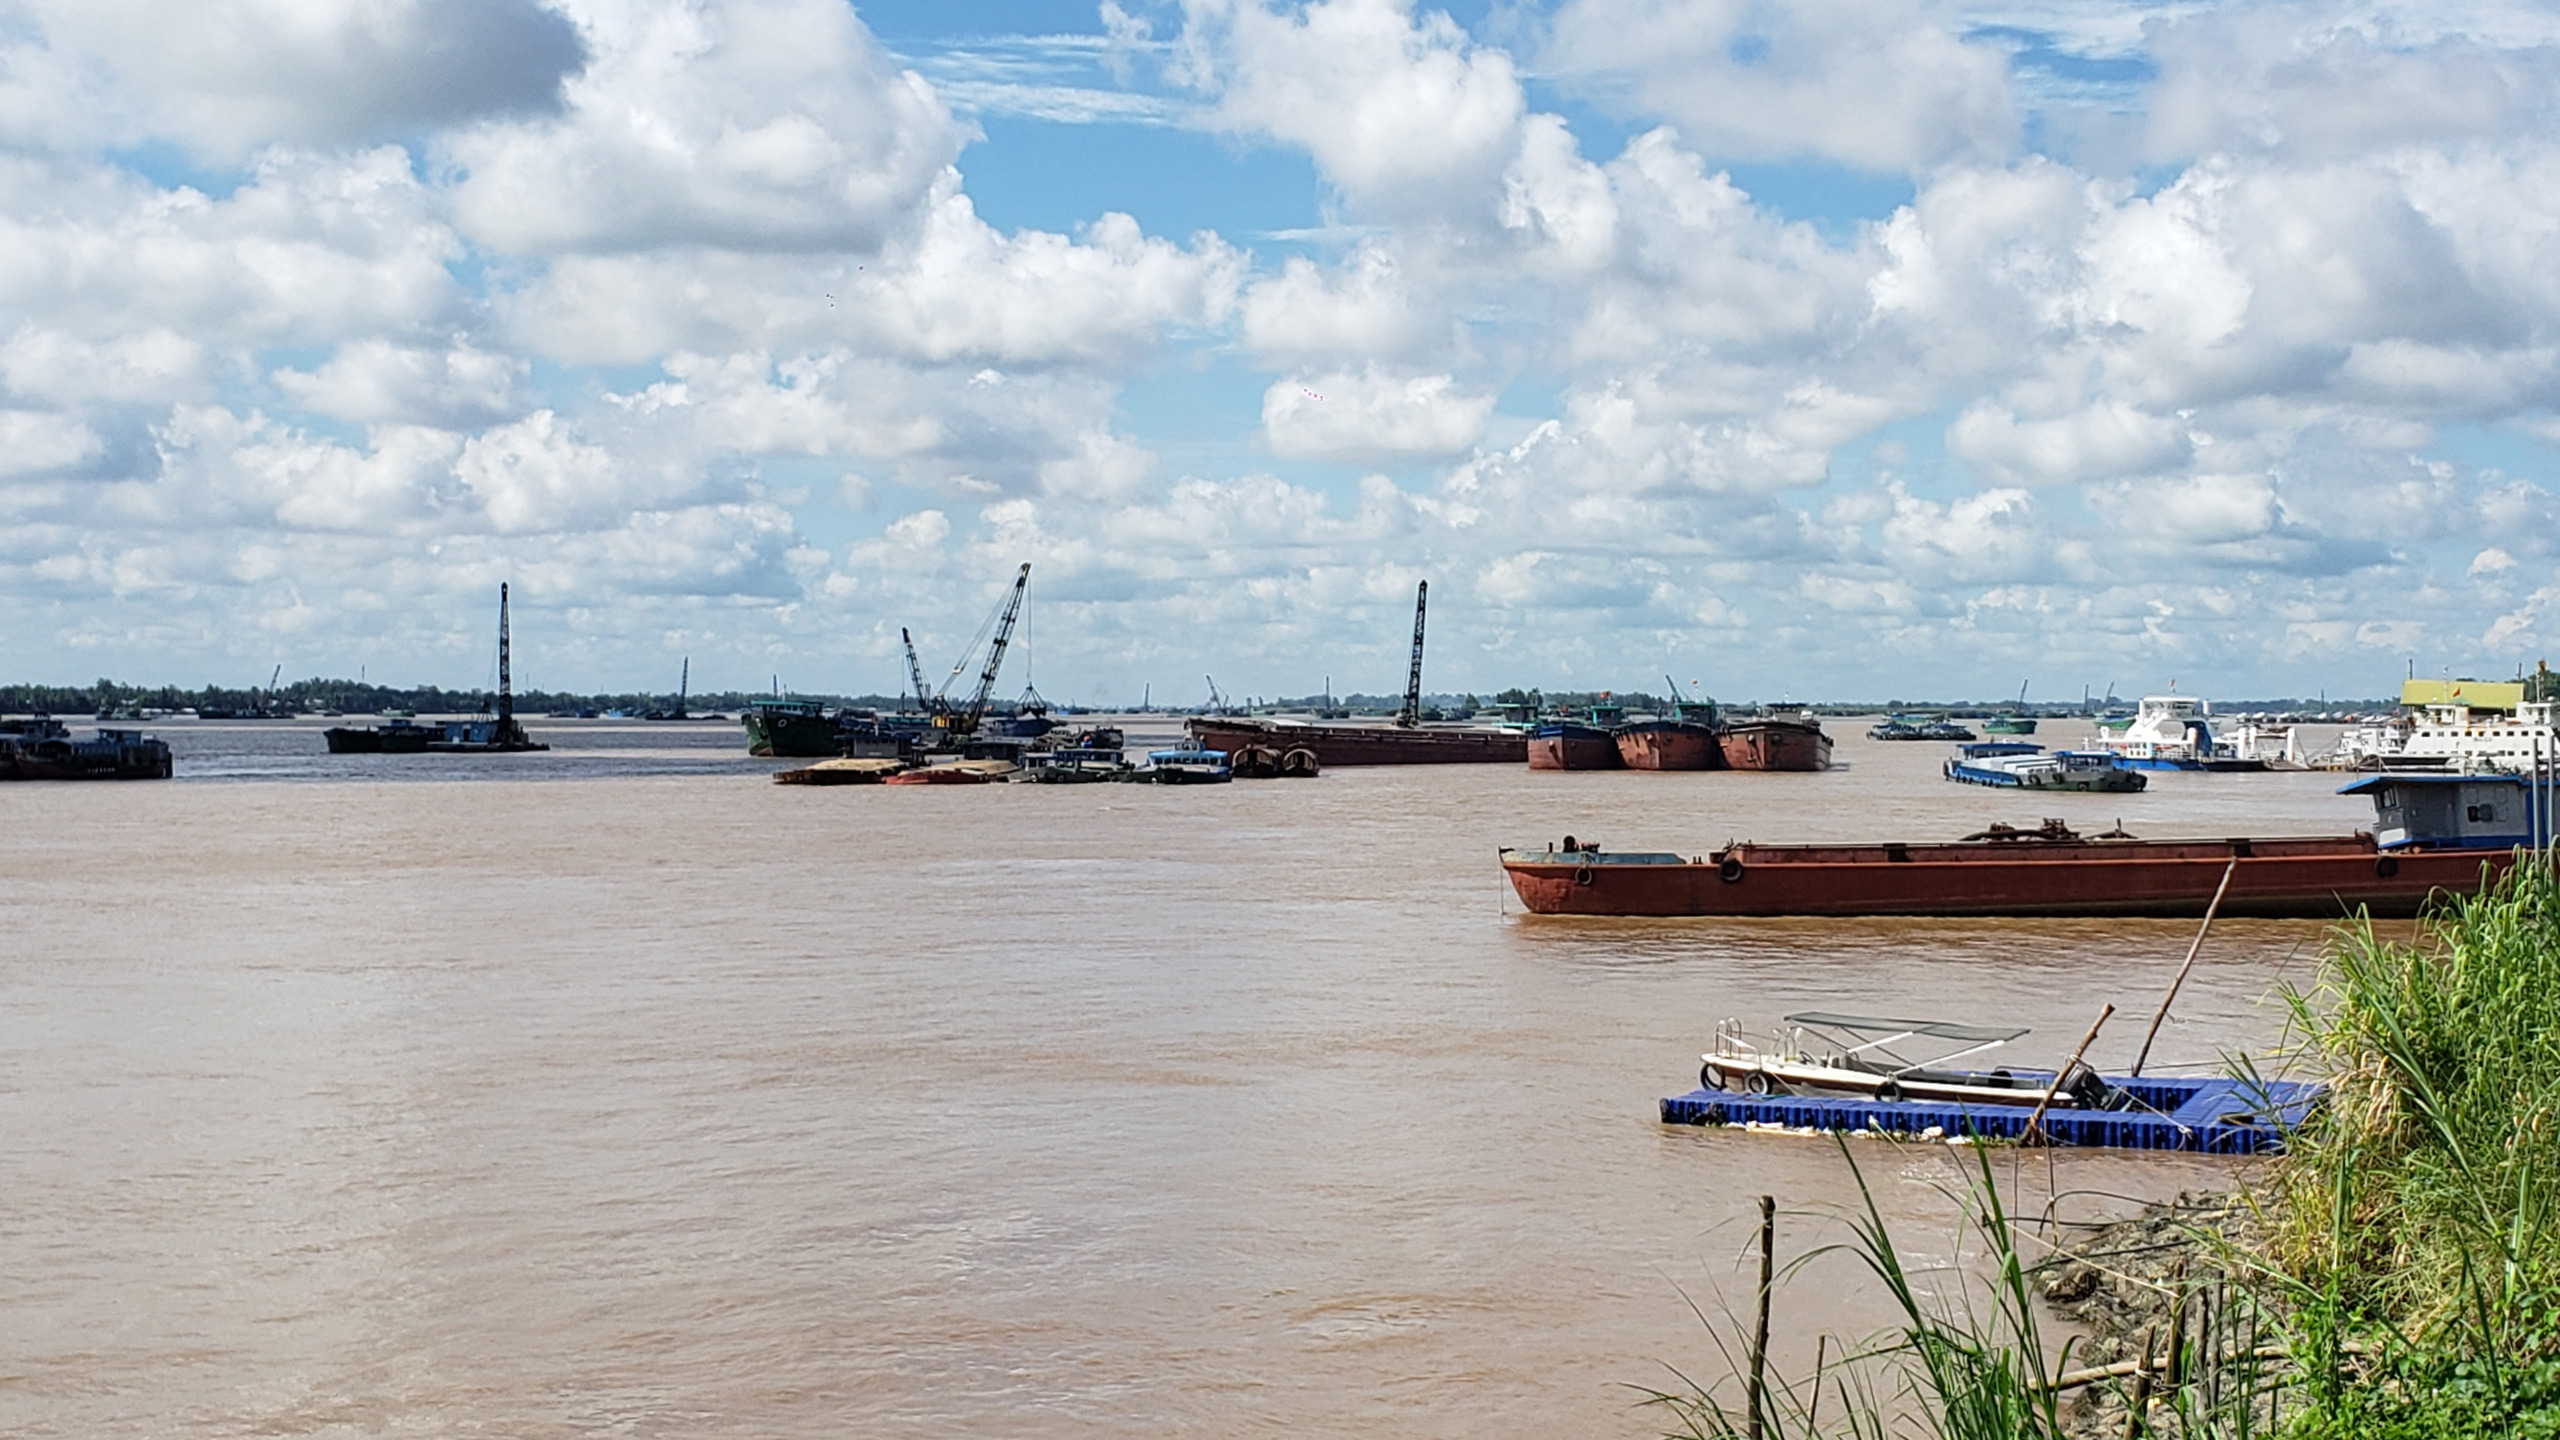 Shipping boats and dredgers form a blockade across the Mekong River in July 2021 near the Cambodia-Vietnam border, blocking ethnic Vietnamese fishers evicted from Phnom Penh waters from crossing into Vietnamese territory. (Danielle Keeton-Olsen)